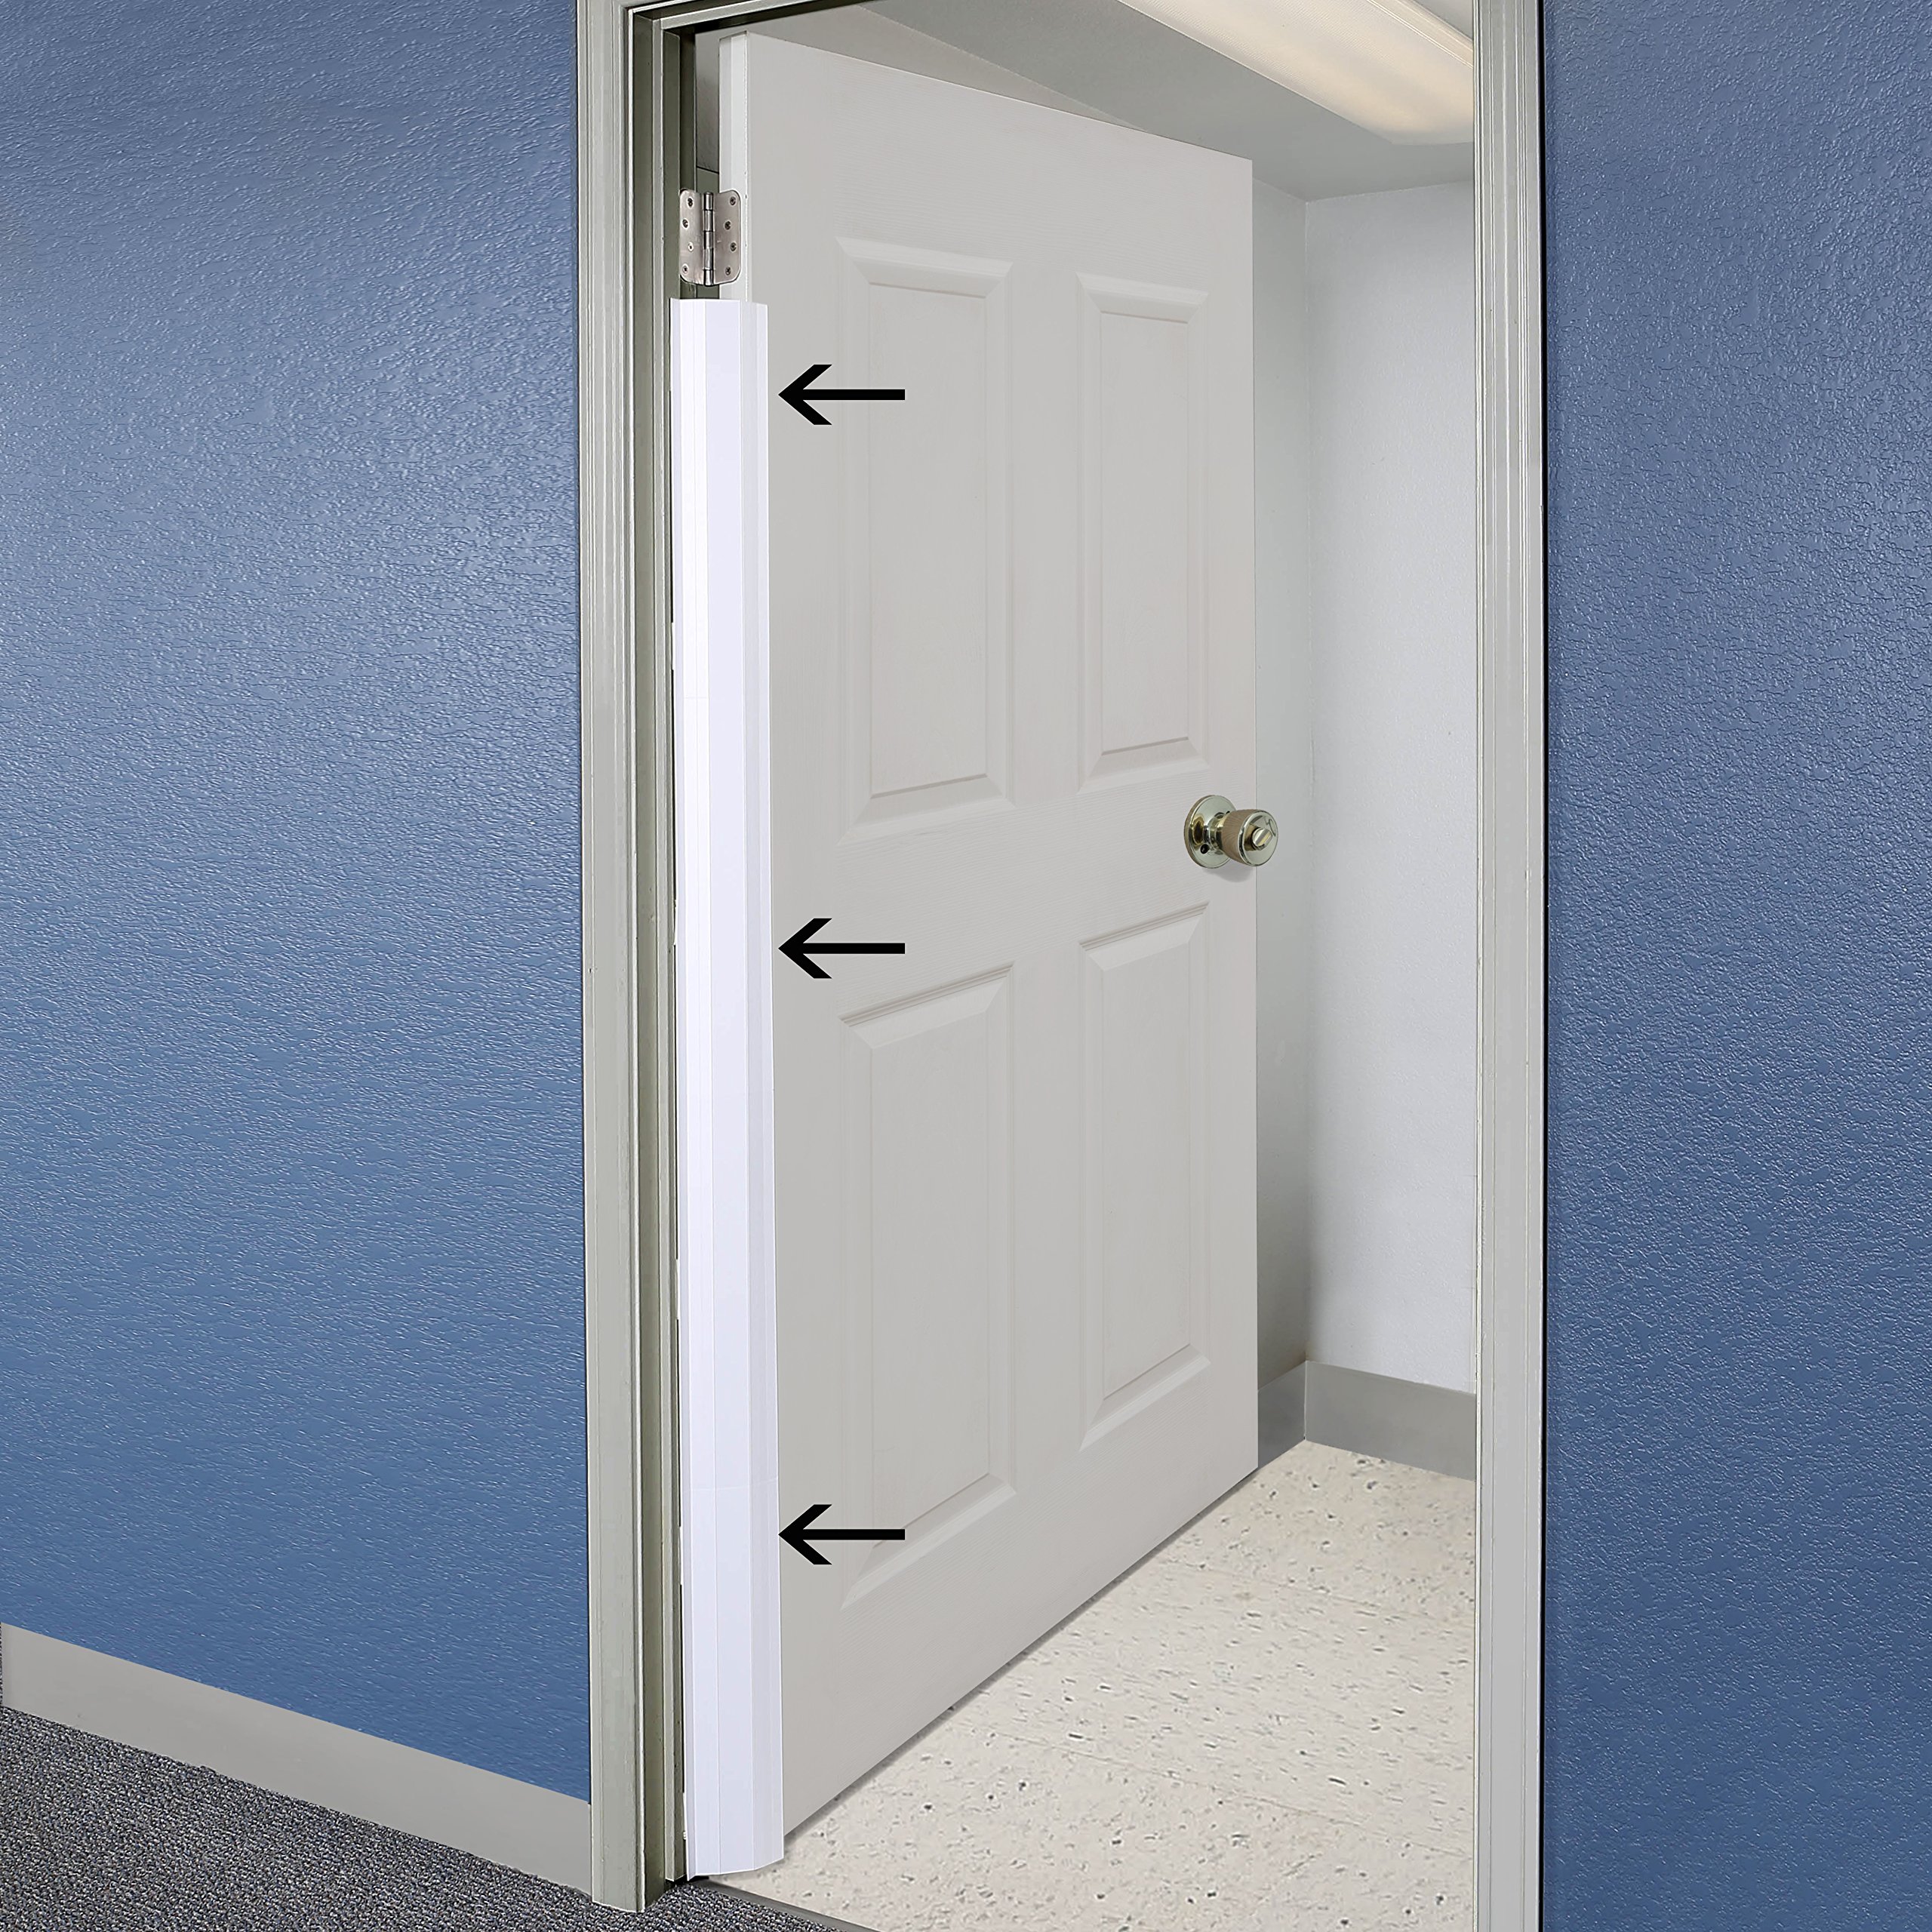 PinchNot Home Door Shield Guard for 90 Degree Doors - Finger Shield & Protector to Child Proof Your Door. by Carlsbad Safety Products